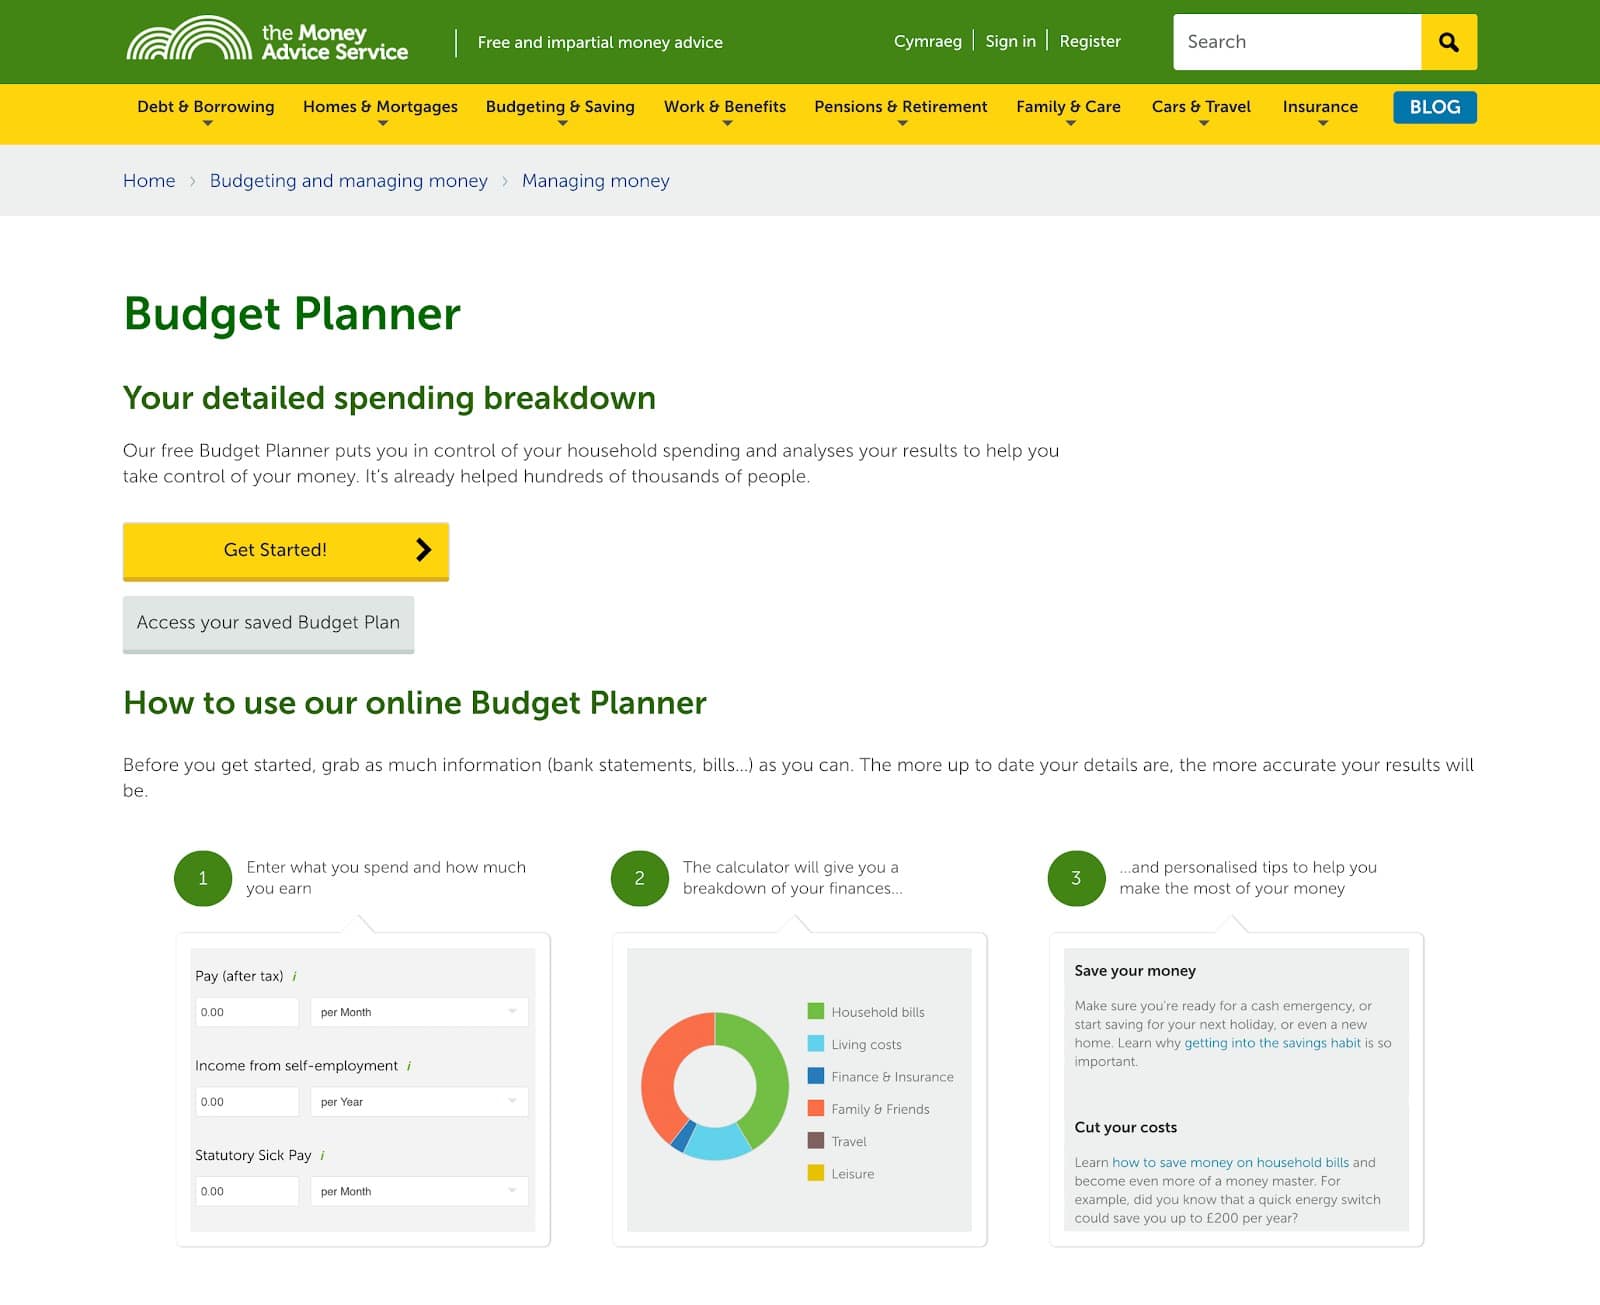 This interactive element is a budget planner